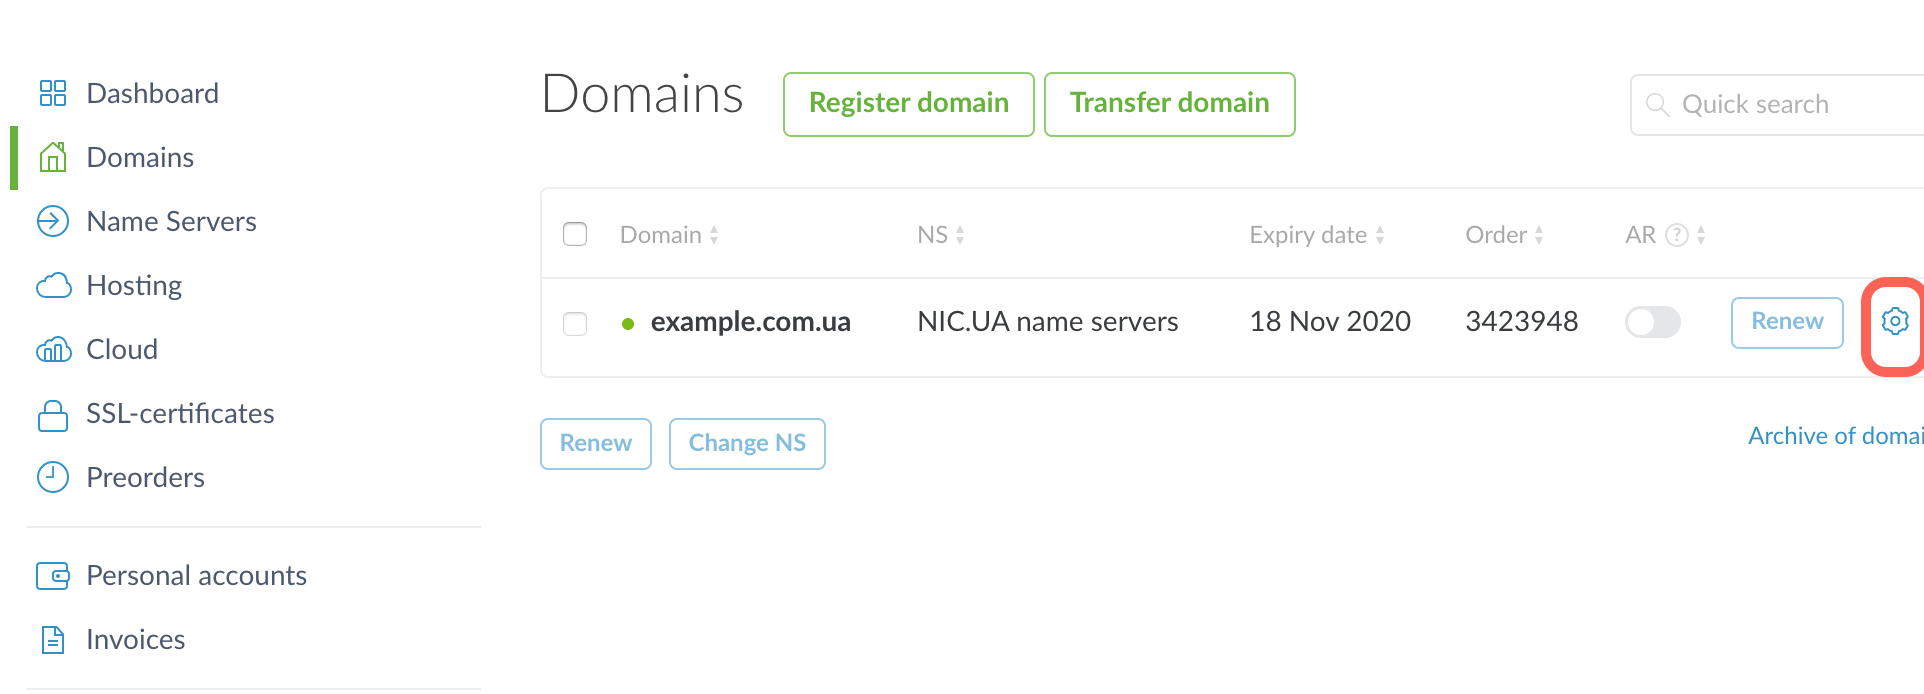 How To Change Your Domain Name On Wix